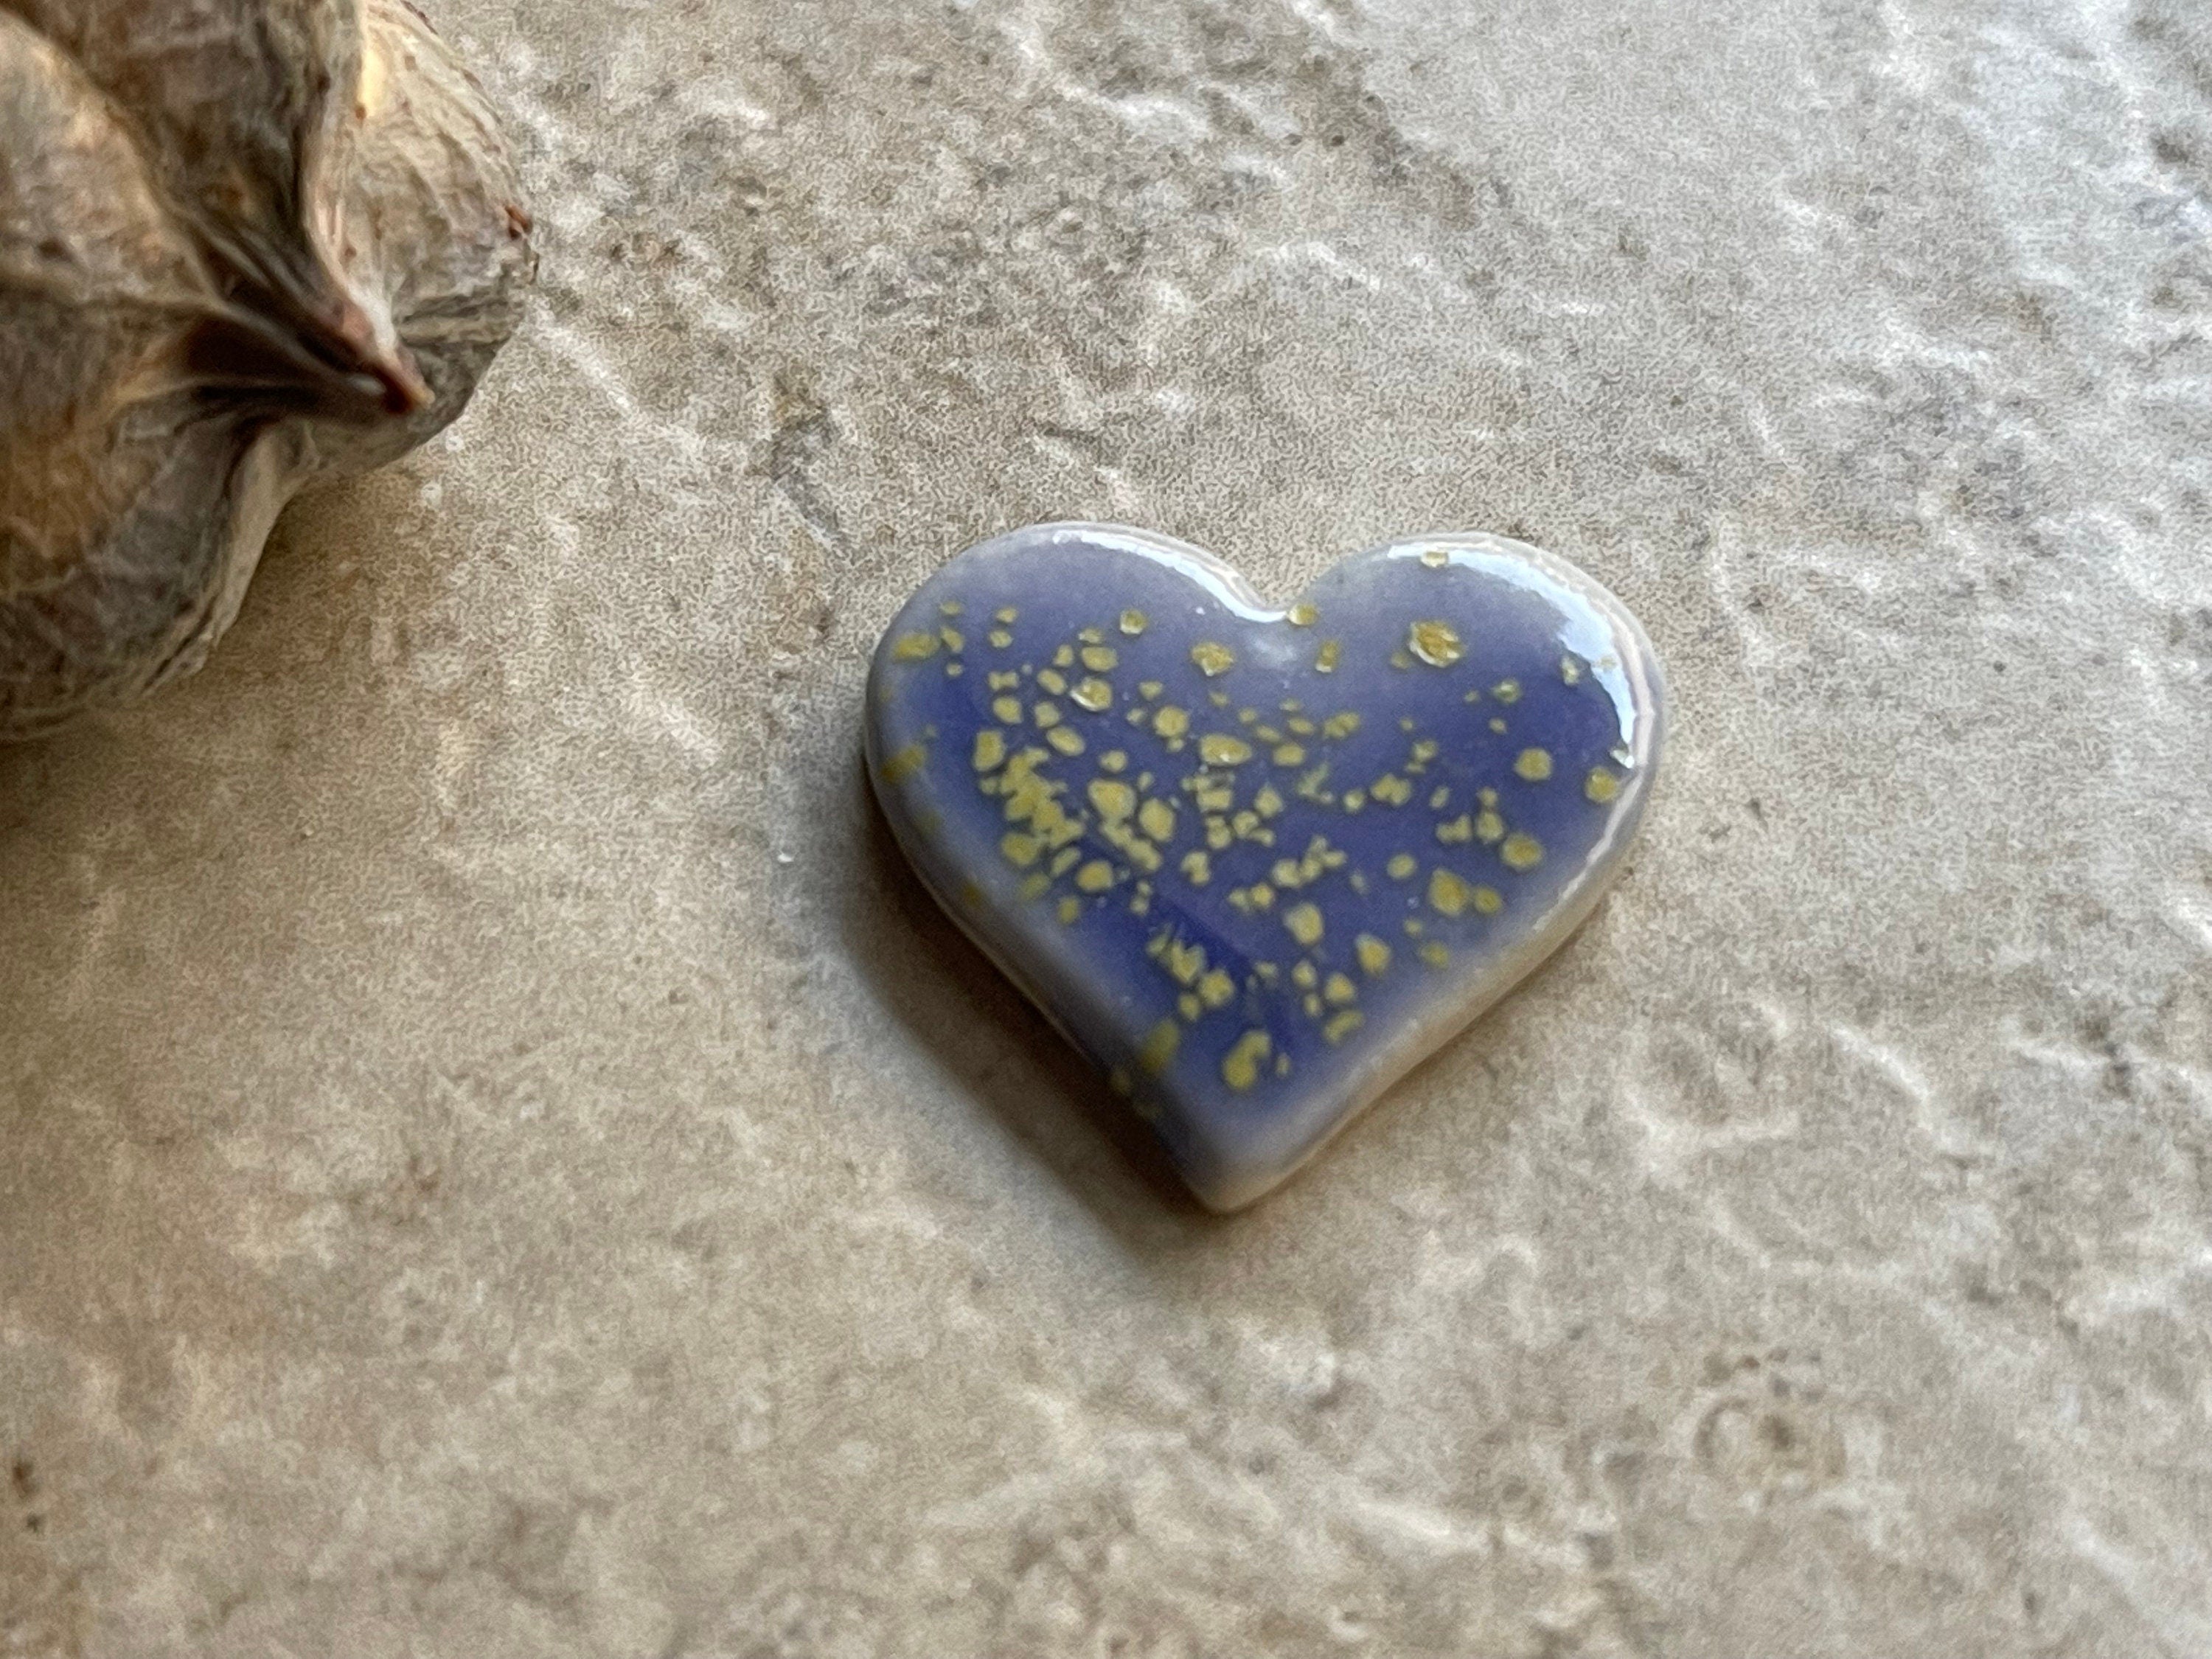 Metalsmithing Cabochon, Blue with Gold Flecks Heart Cab, Porcelain Heart Cab, Ceramic Charms, Jewelry Making Components